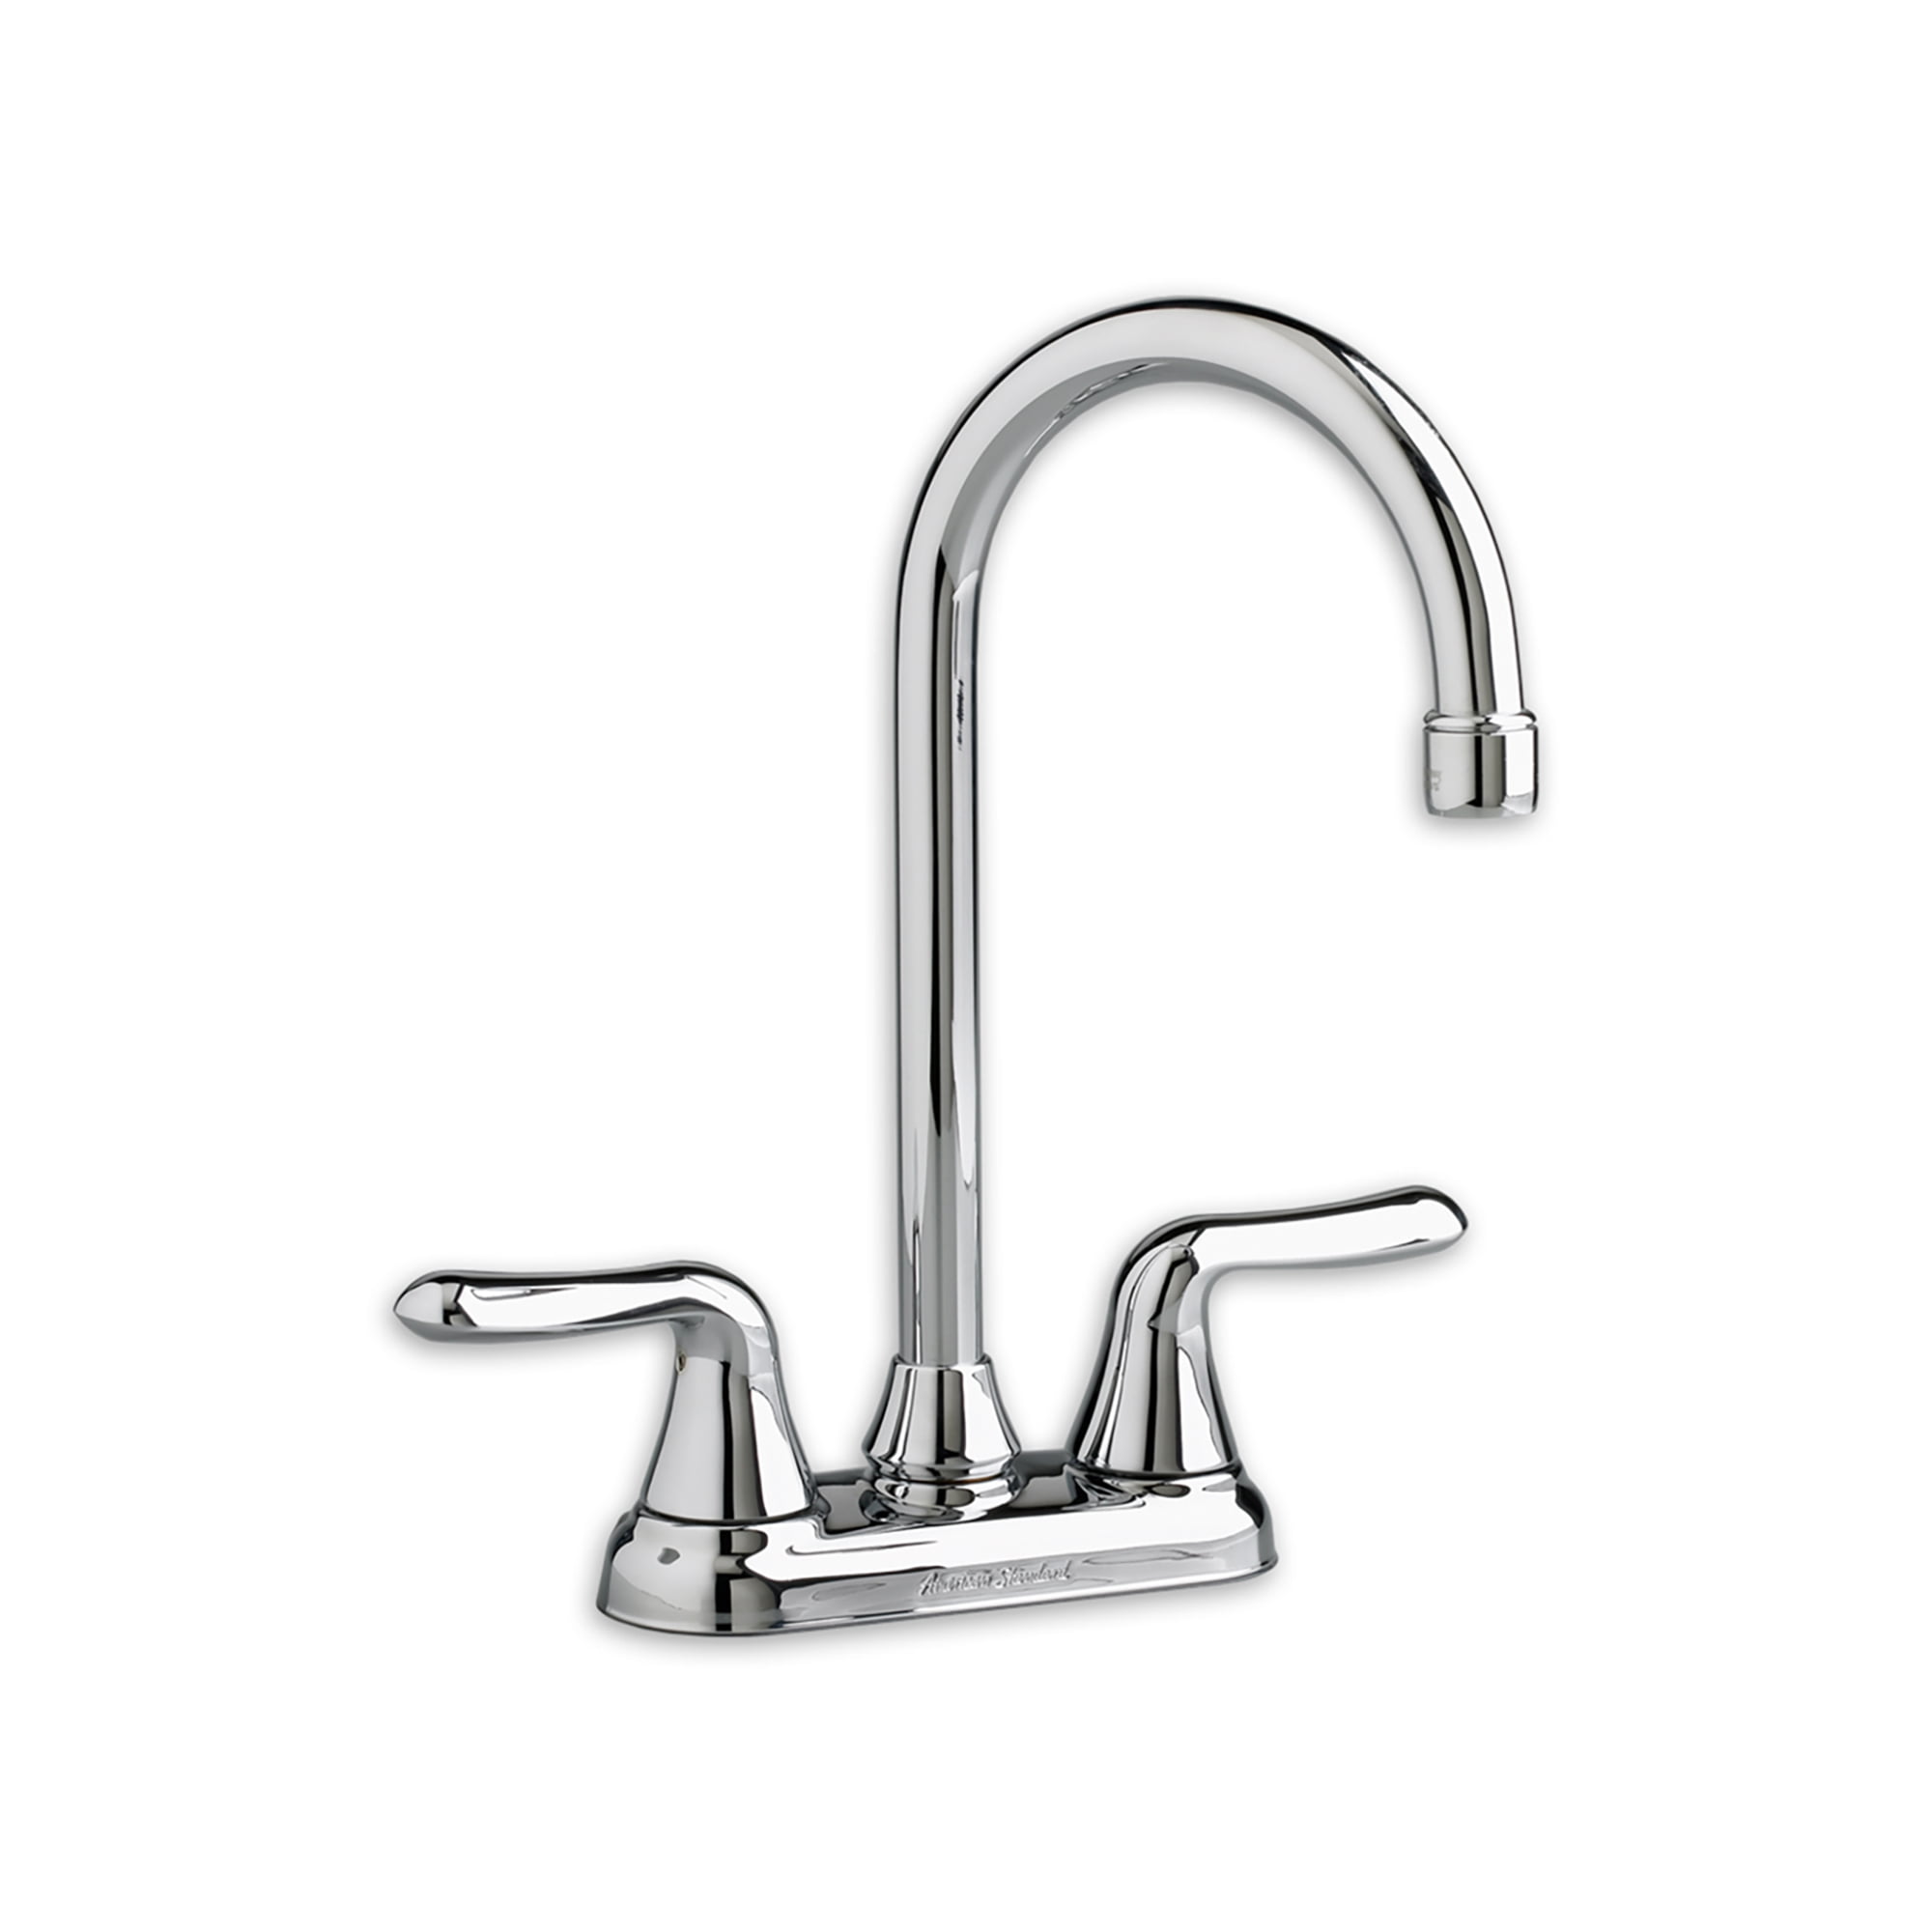 Chrome American Standard 7295252.002 5-5/8-Inch Heritage Wall-Mount Swivel Spout Kitchen Faucet with Porcelain Lever Handles